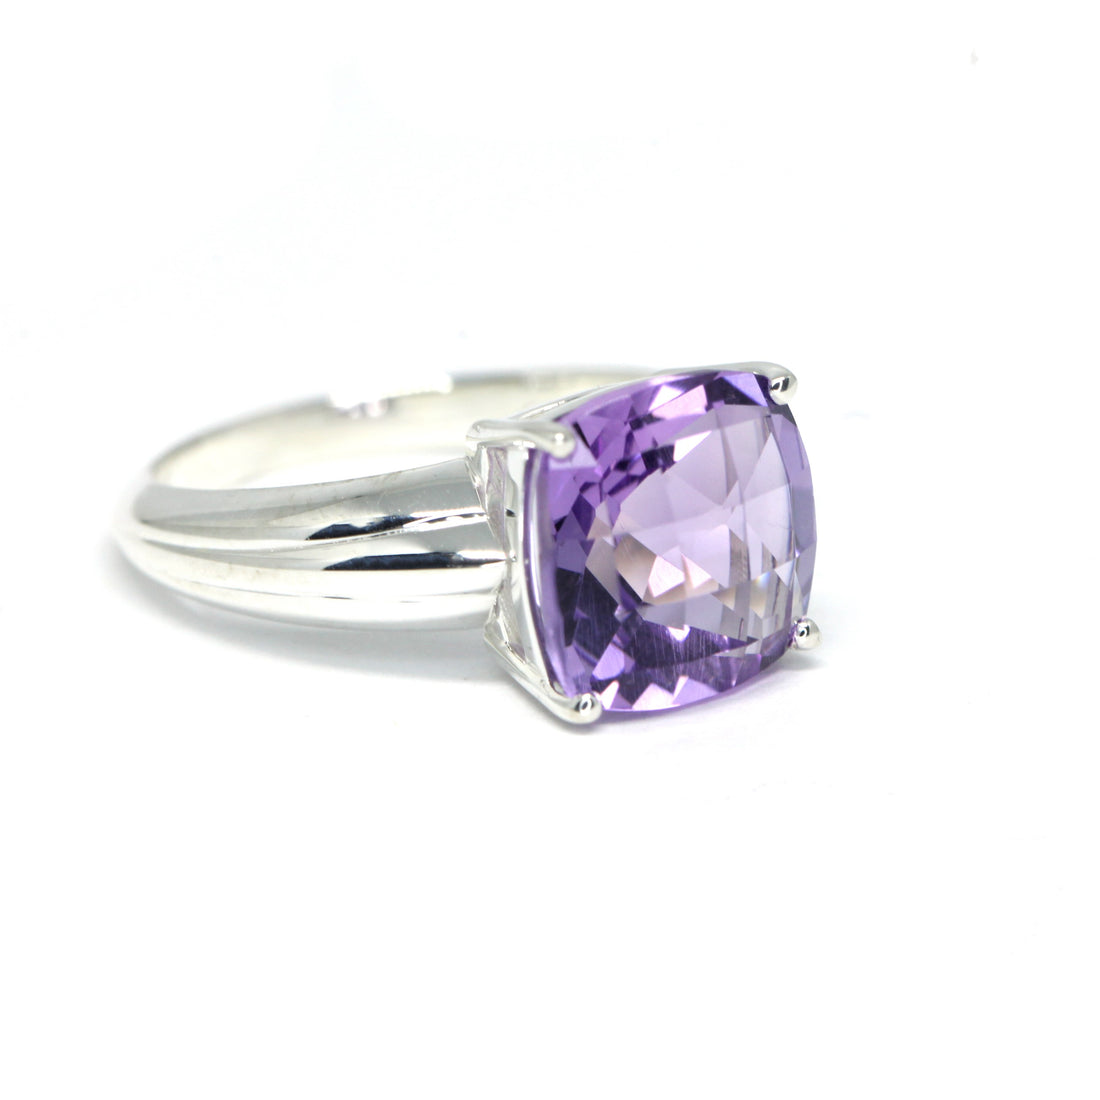 Side view of cocktail ring bena jewelry unisex amethyst bold gemstone ring montreal made in canada purple gemstone ring custom made birdal jewelry montreal